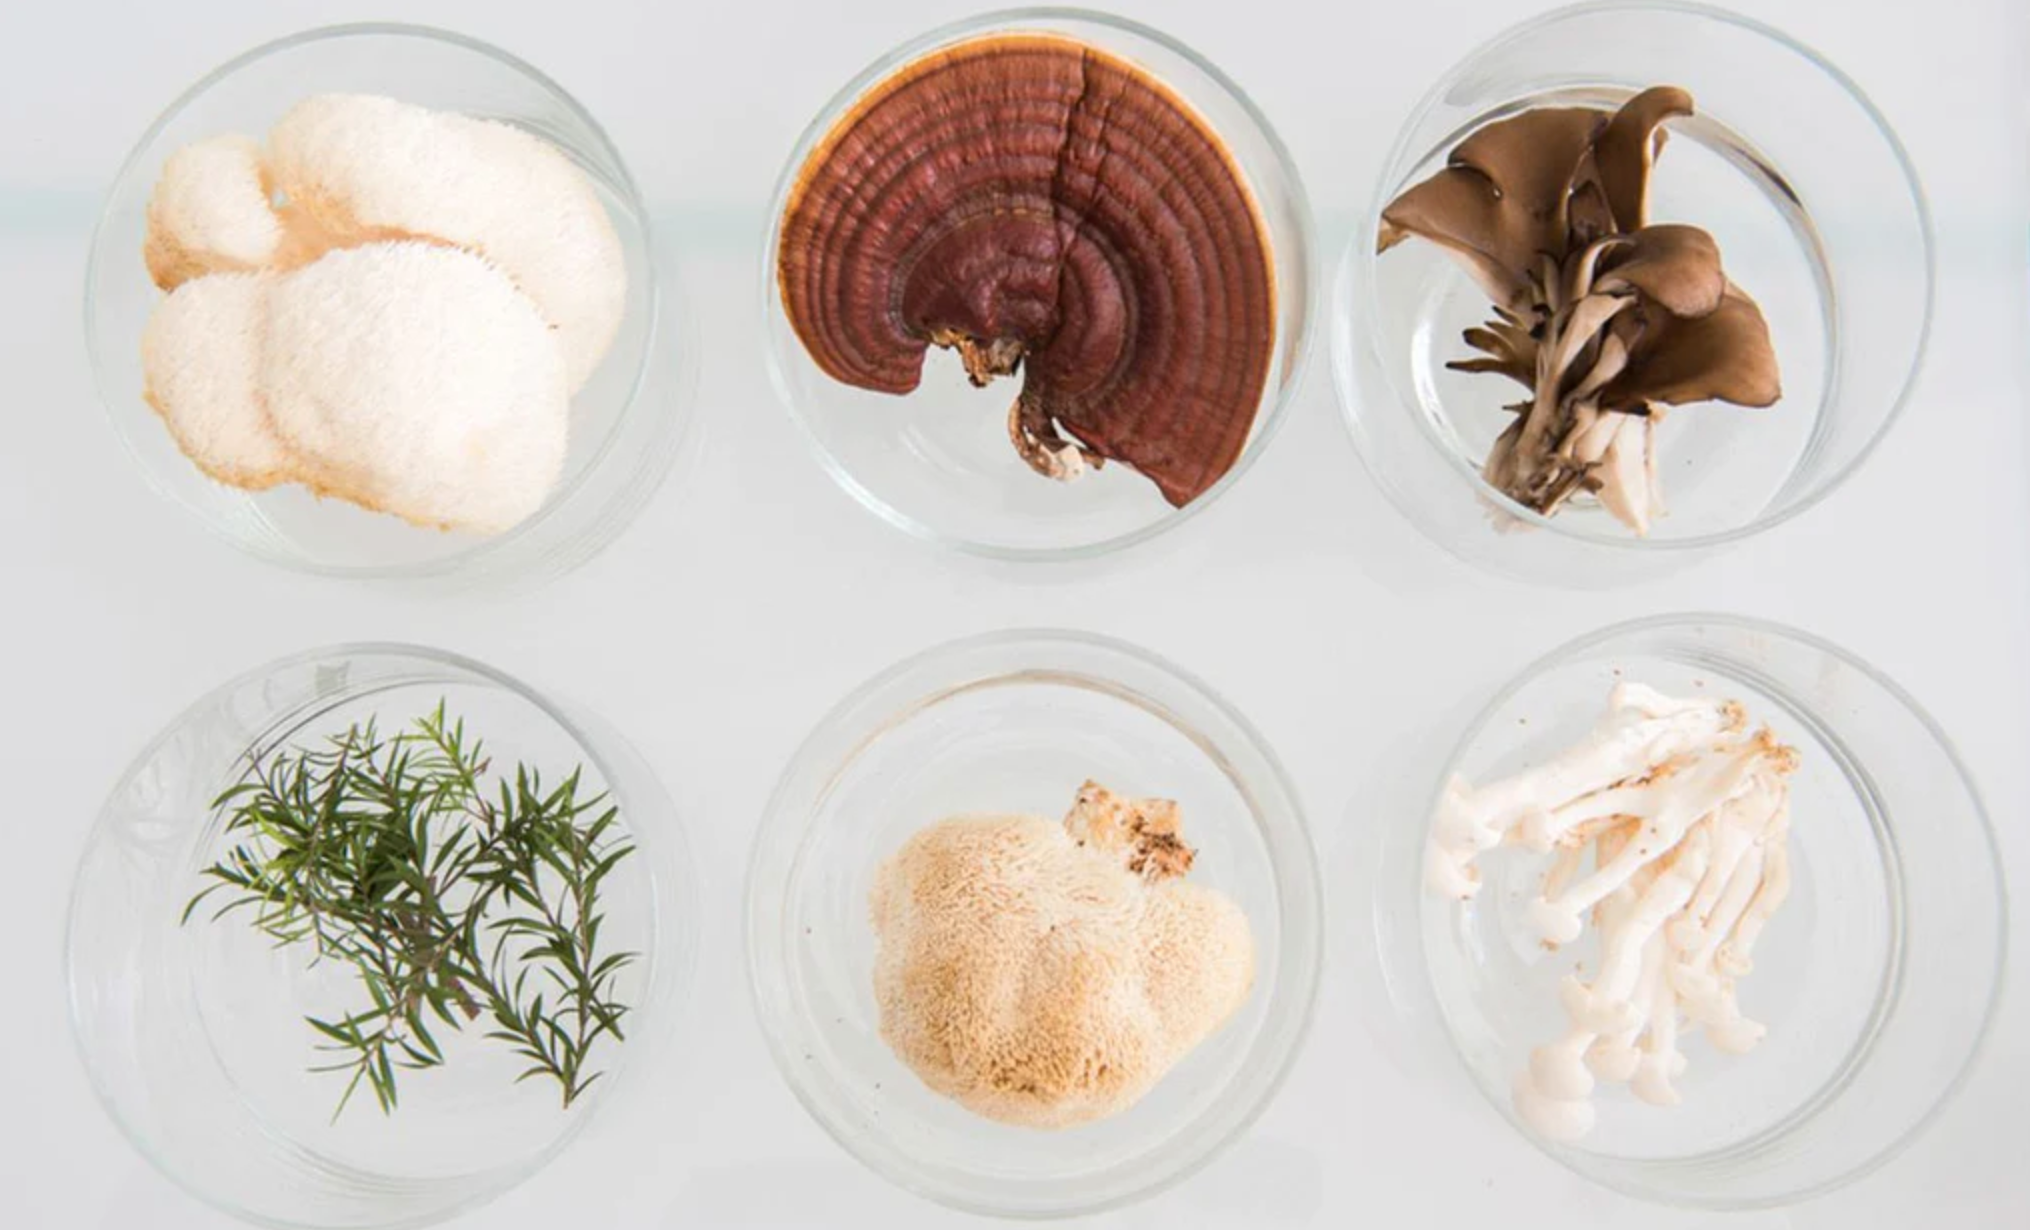 Discover the Power of Medicinal Mushrooms: A Guide to 8 Mushrooms and their Health Benefits